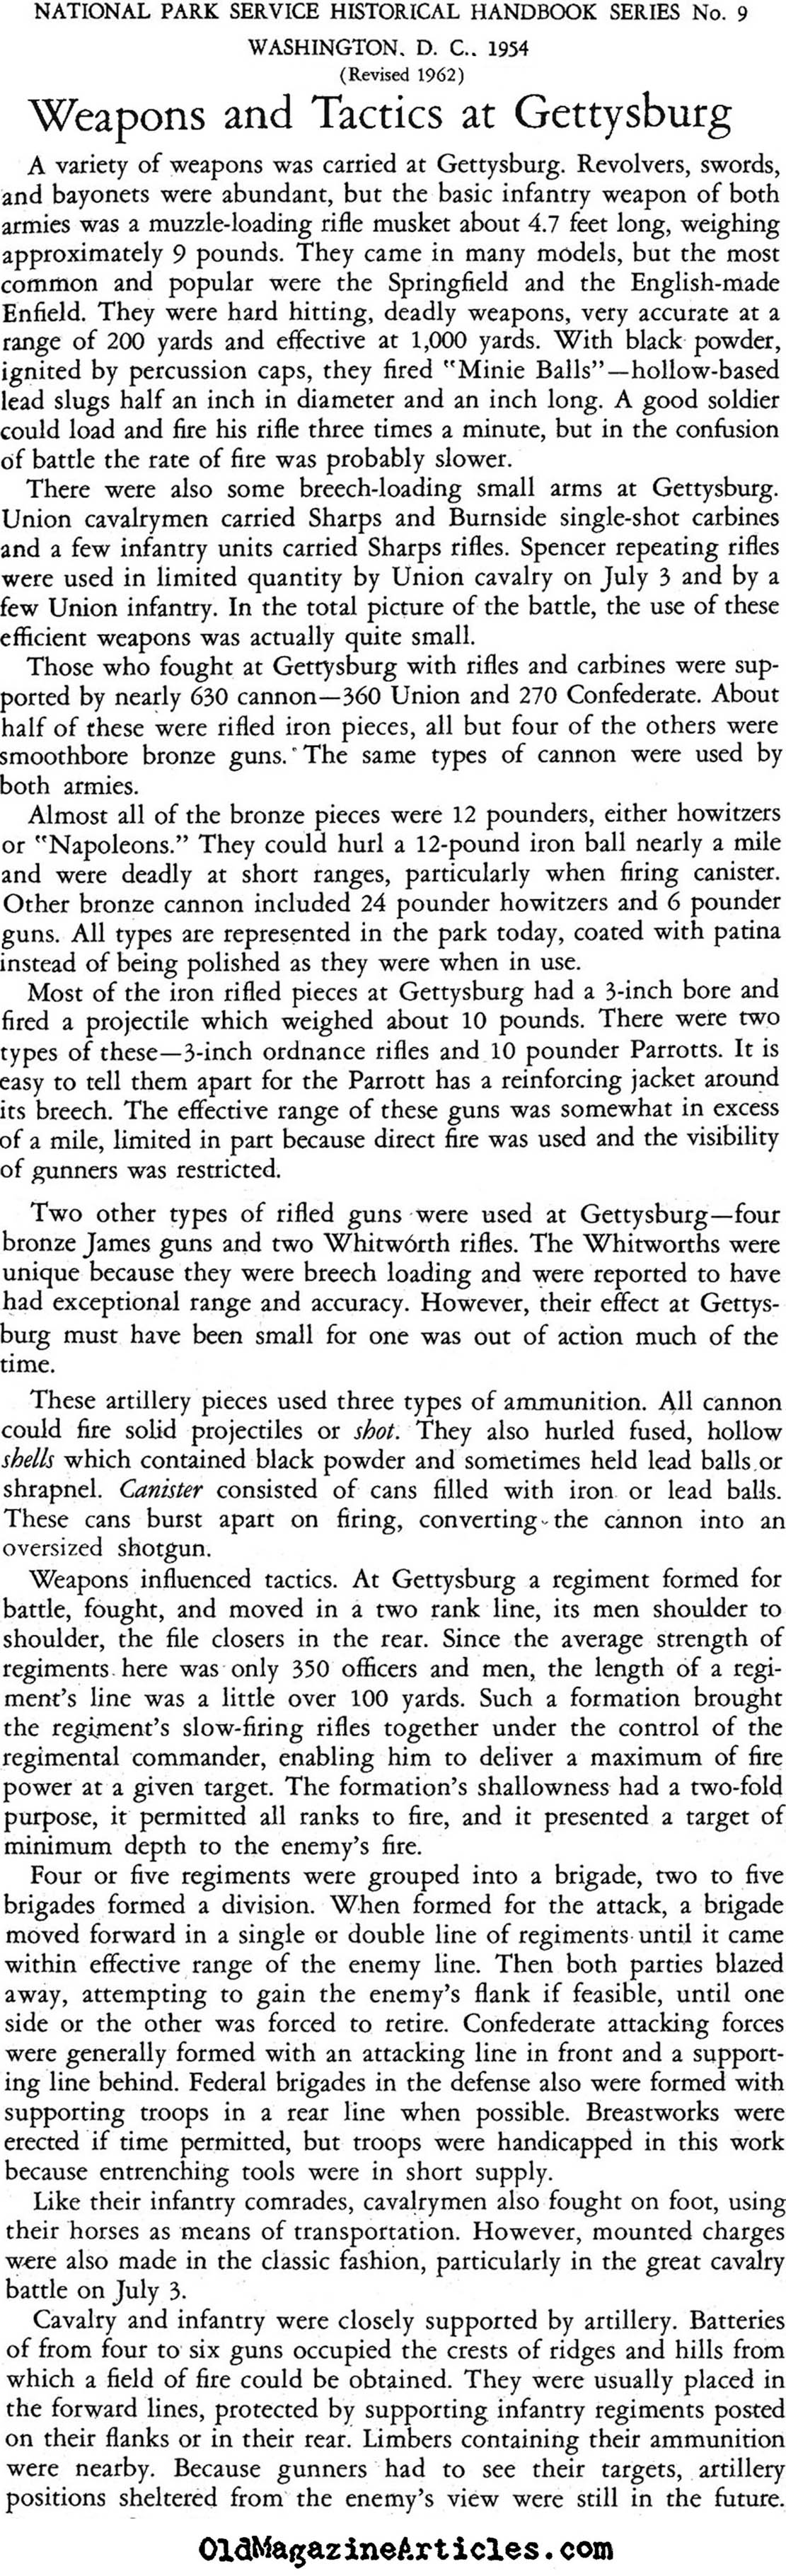 Weapons and Tactics at Gettysburg (National Park Service, 1954)